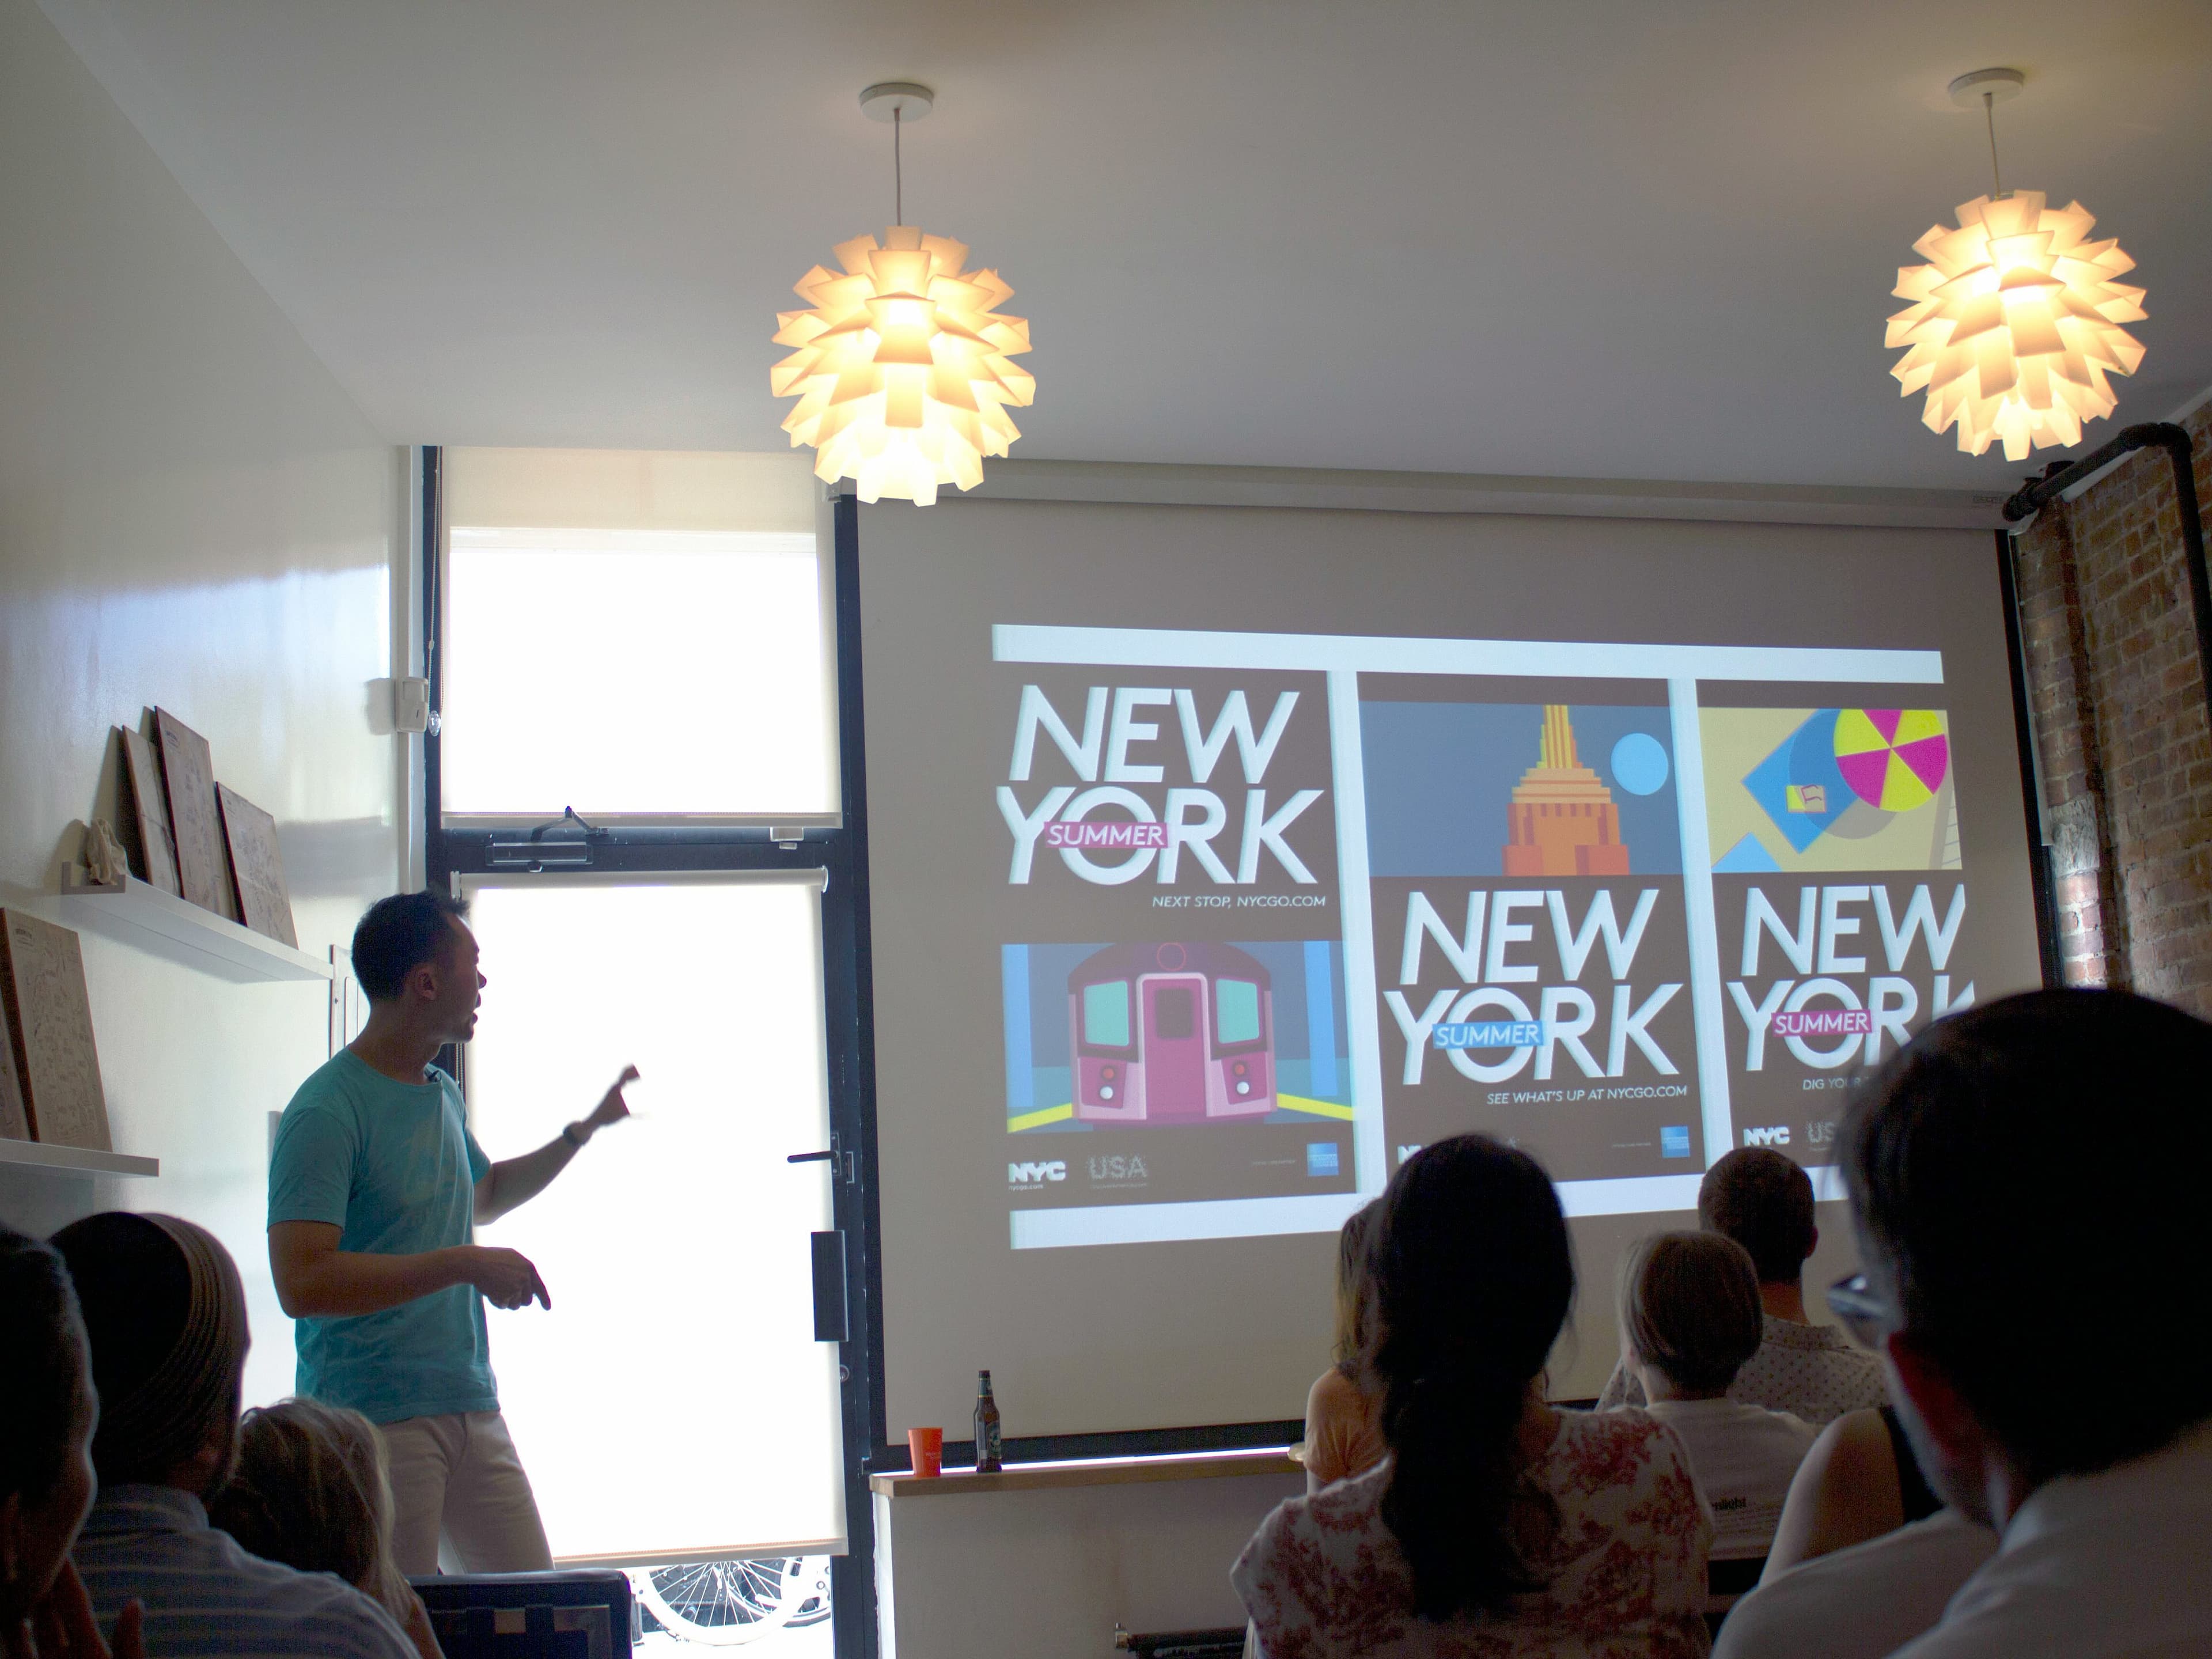 A person is giving a presentation in a dimly lit room, pointing to a large screen displaying four slides with "NEW YORK" in bold text. An audience seated in front is watching attentively. The room has modern hanging lights and an exposed brick wall.